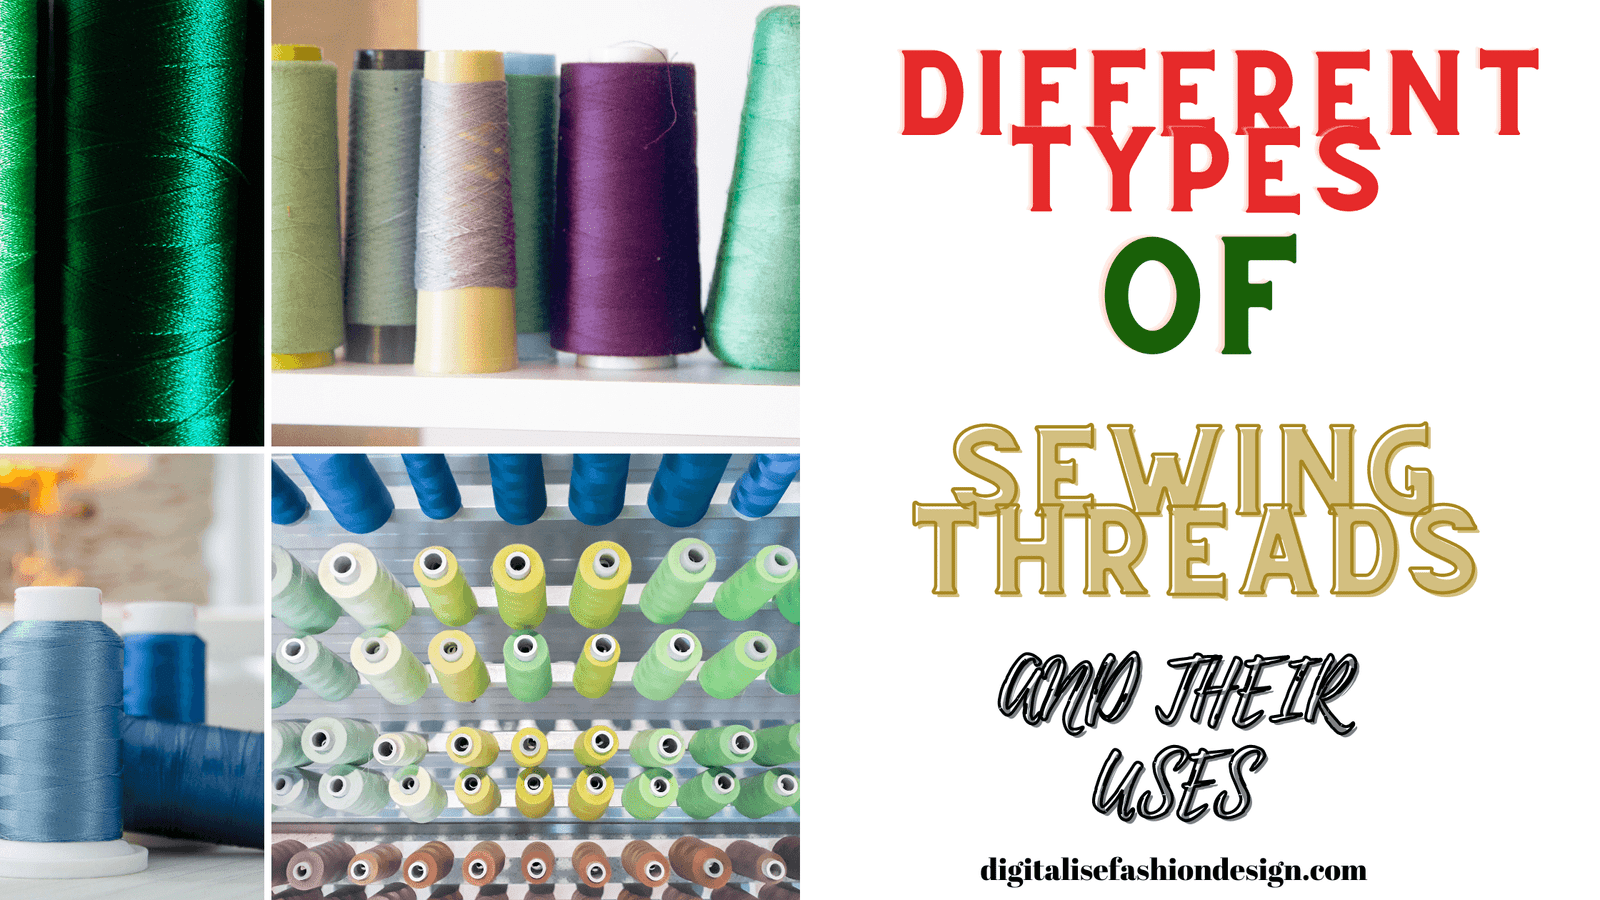 Different types of sewing threads